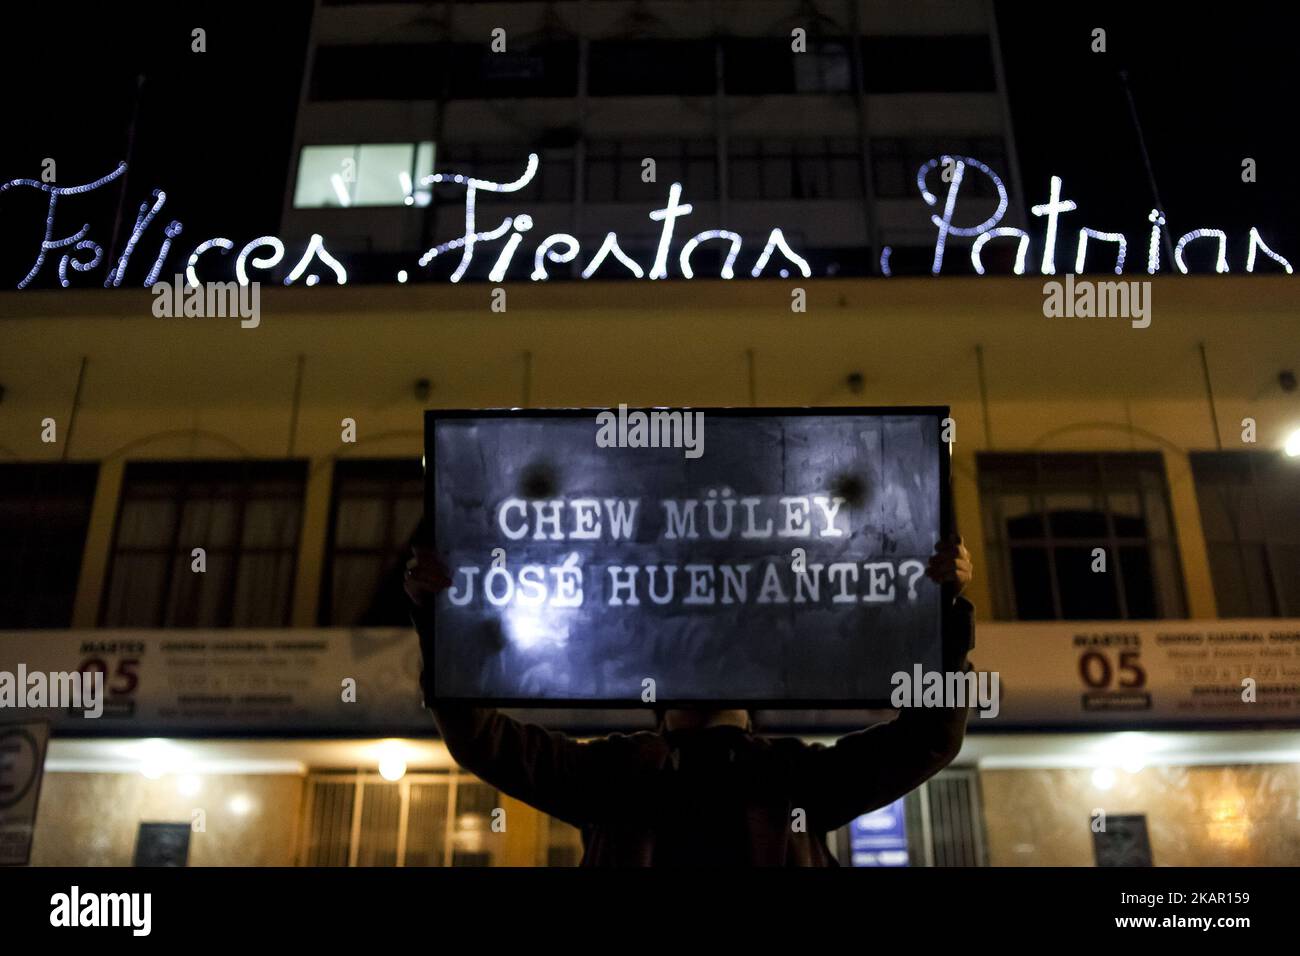 Osorno, Chile. 03 September 2017. Where is José Huenante written in Mapuche language. Mapuche Huilliche visual artist Francisco Vargas Huaiquimilla walks in the city holding a plasma tv with the image and texts referring to the disappearance of the young man José Huenante. José Gerardo Huenante Huenante, a 16-year-old boy, was arrested and made to disappear by the Chilean police on September 3, 2005 in the city of Puerto Montt in southern Chile. José disappears during the government of the Concertación chaired by Ricardo Lagos. He is the second detainee disappeared in civilian governments. The Stock Photo